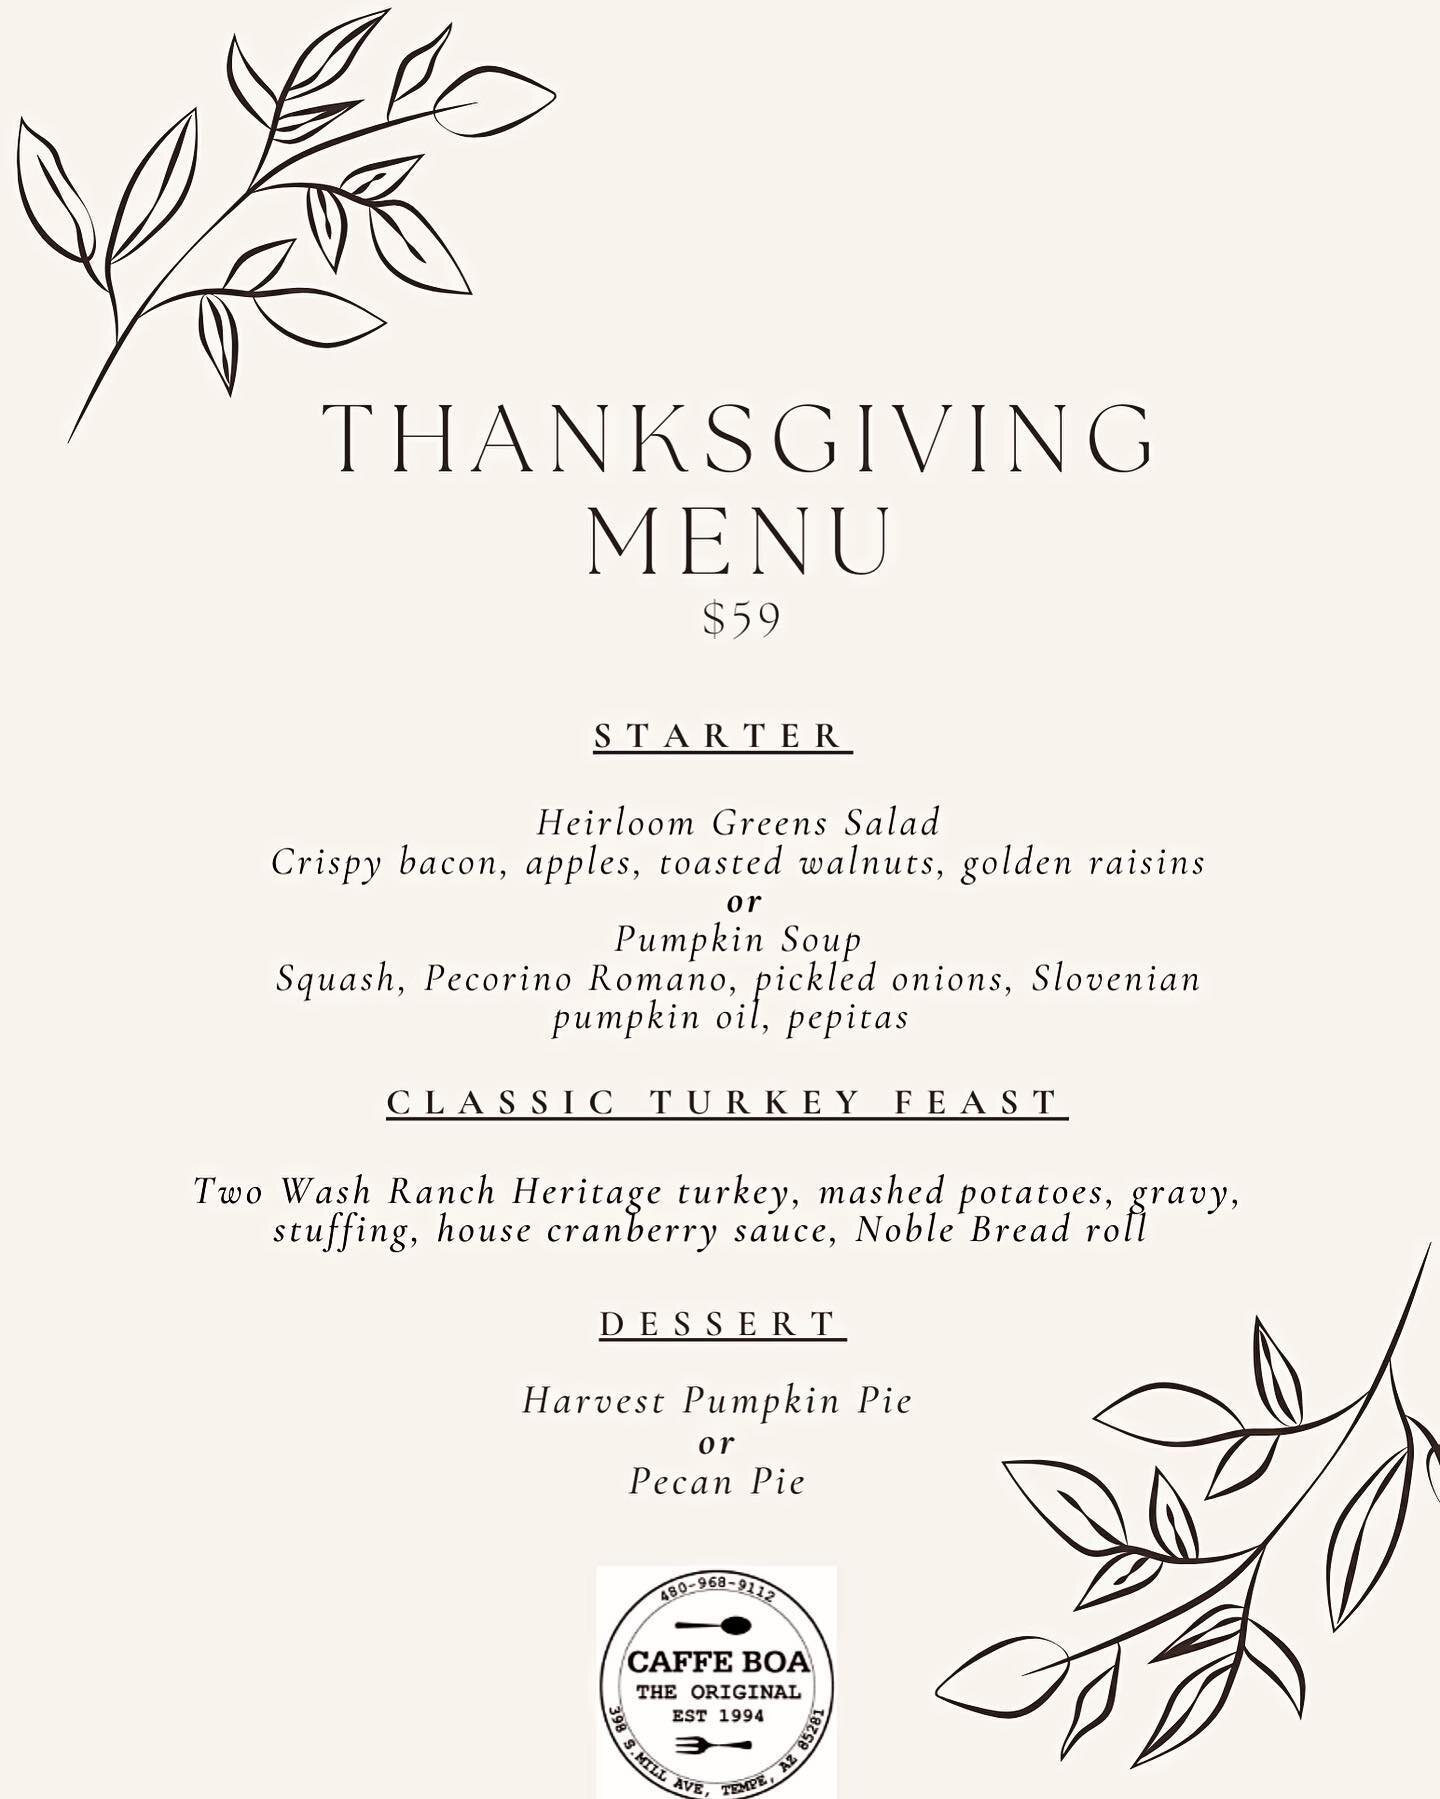 We are so thankful to celebrate another Thanksgiving holiday with you all! 🍁Featuring our regular dinner menu all day or our special Thanksgiving feast.
Always homemade, always local, always love! &hearts;️
Give us a call to book your reservation, o